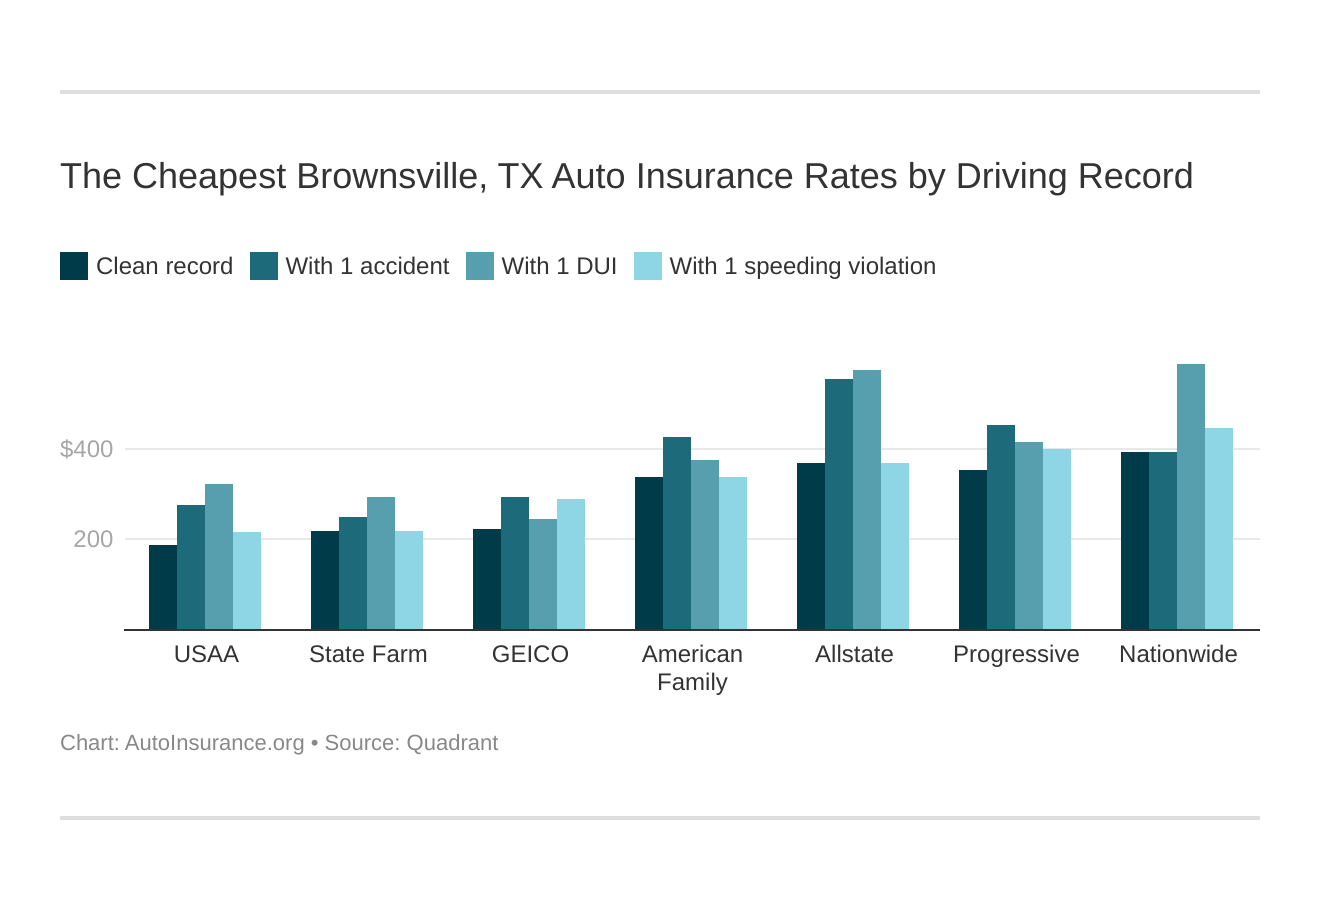 The Cheapest Brownsville, TX Auto Insurance Rates by Driving Record